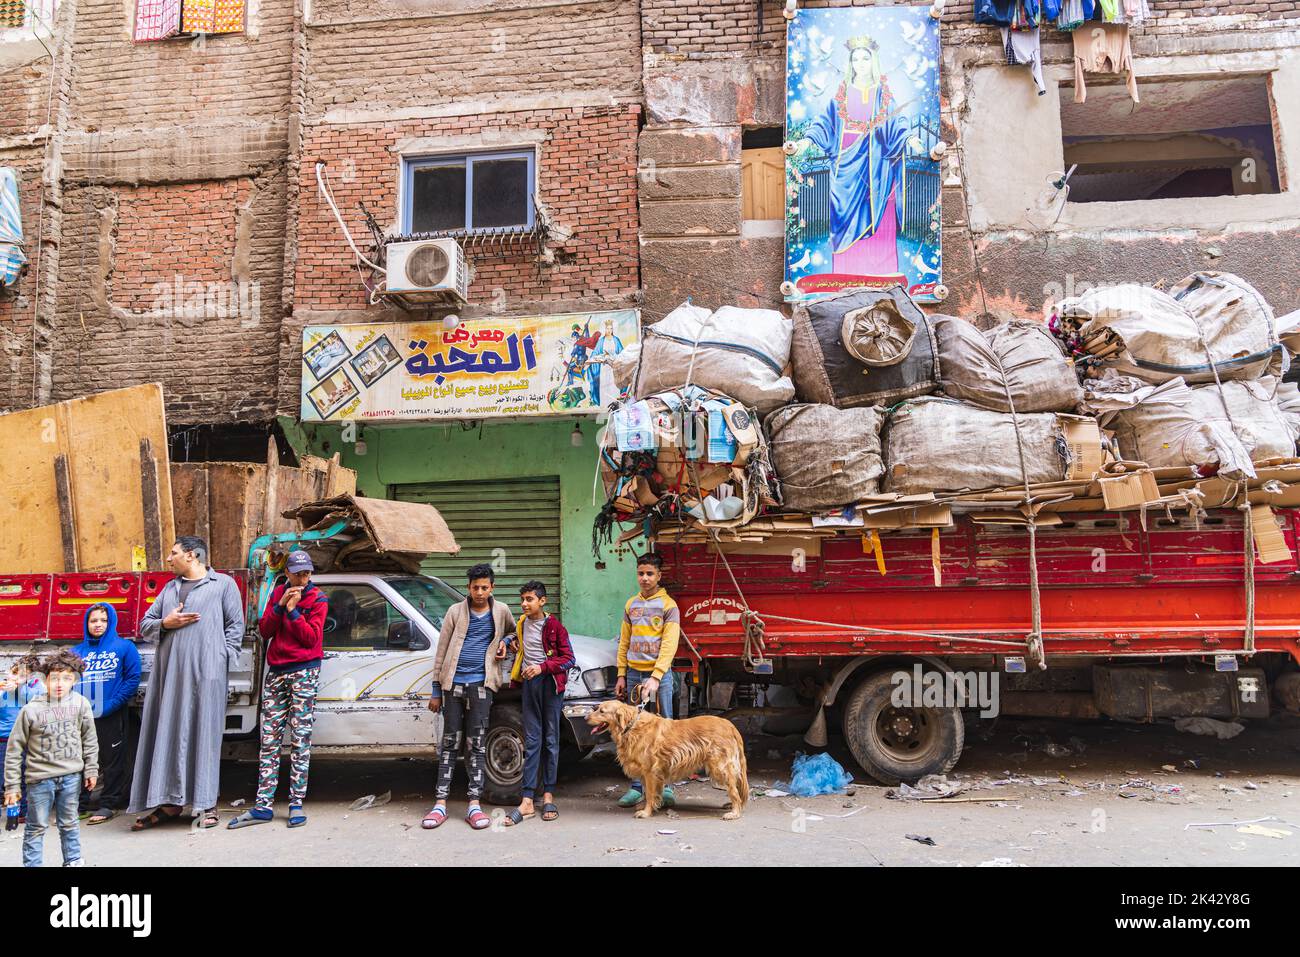 Manshiyat Naser, Garbage City, Cairo, Egypt. February 14, 2022. A truck loaded with recycled materials in Manshiyat Naser, Garbage City, Cairo. Stock Photo